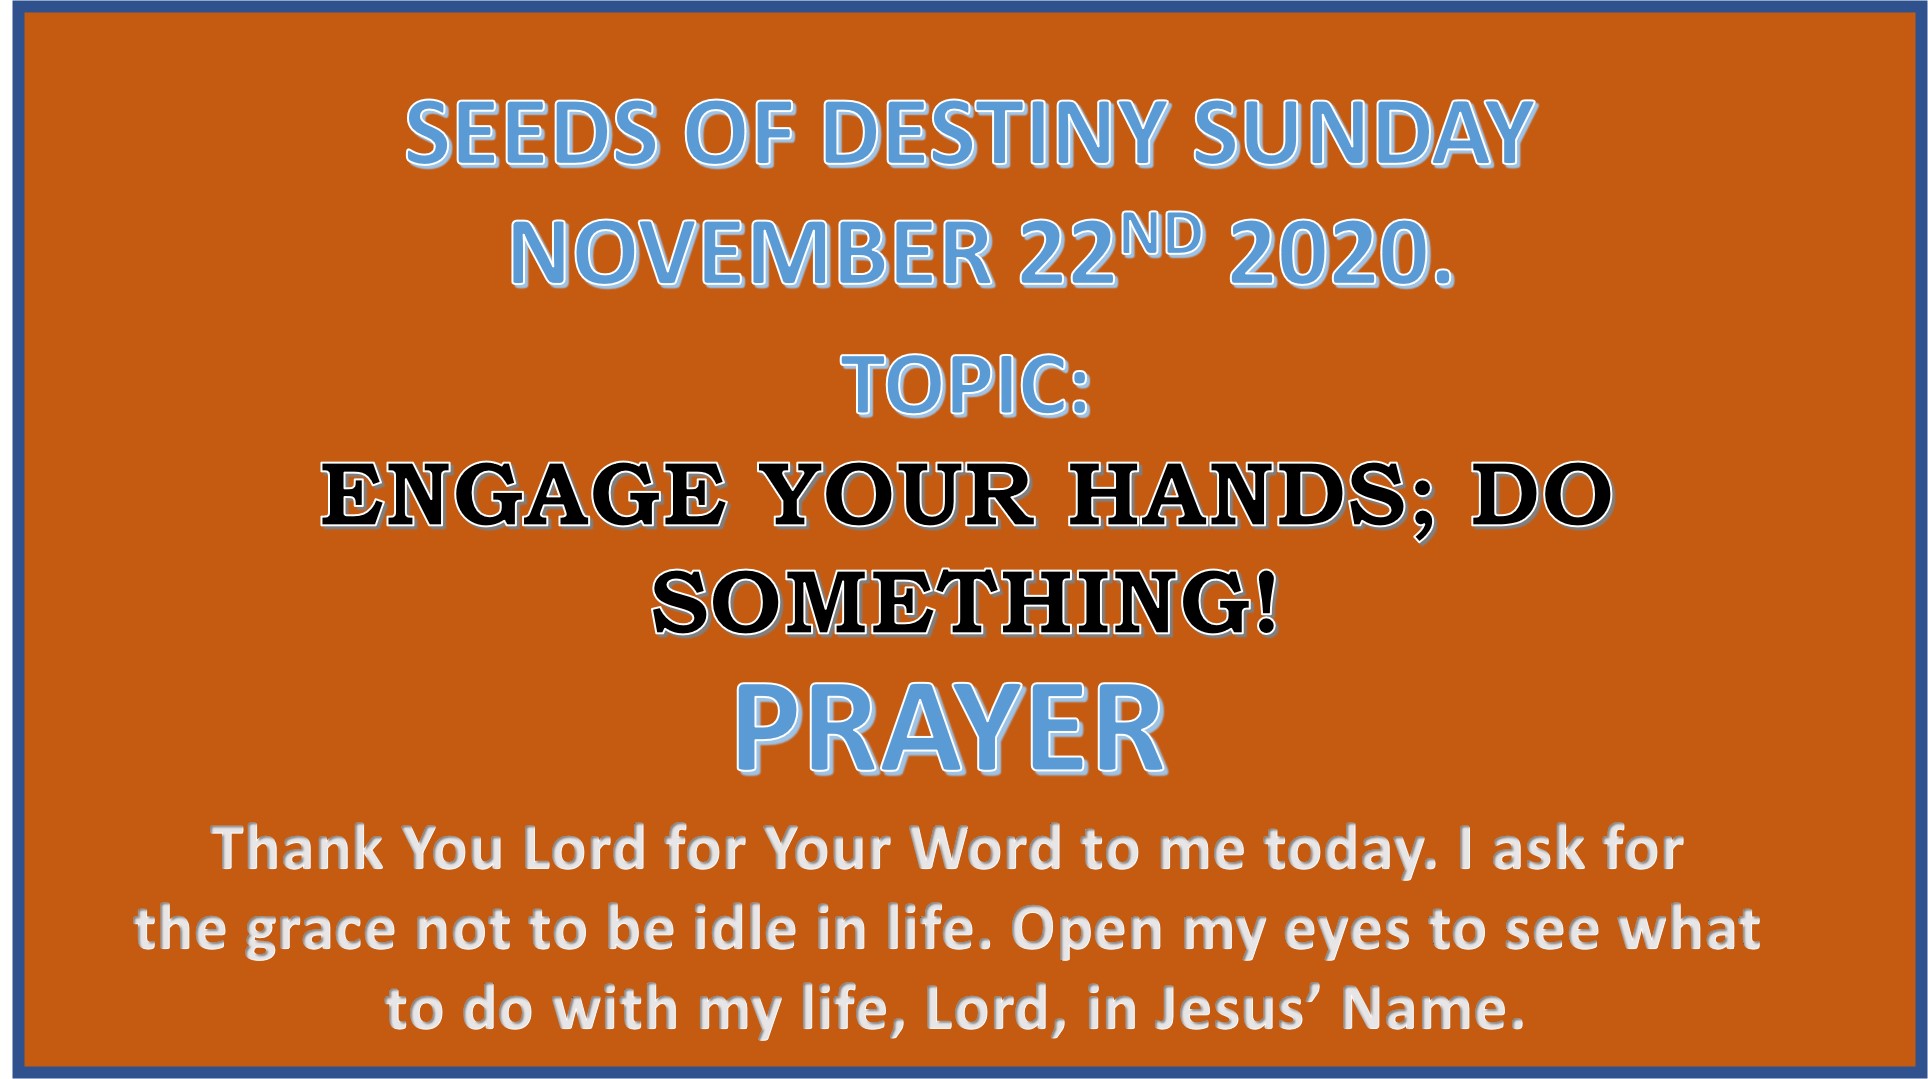 Seeds of Destiny Sunday 22nd November 2020 by Dr Paul Enenche